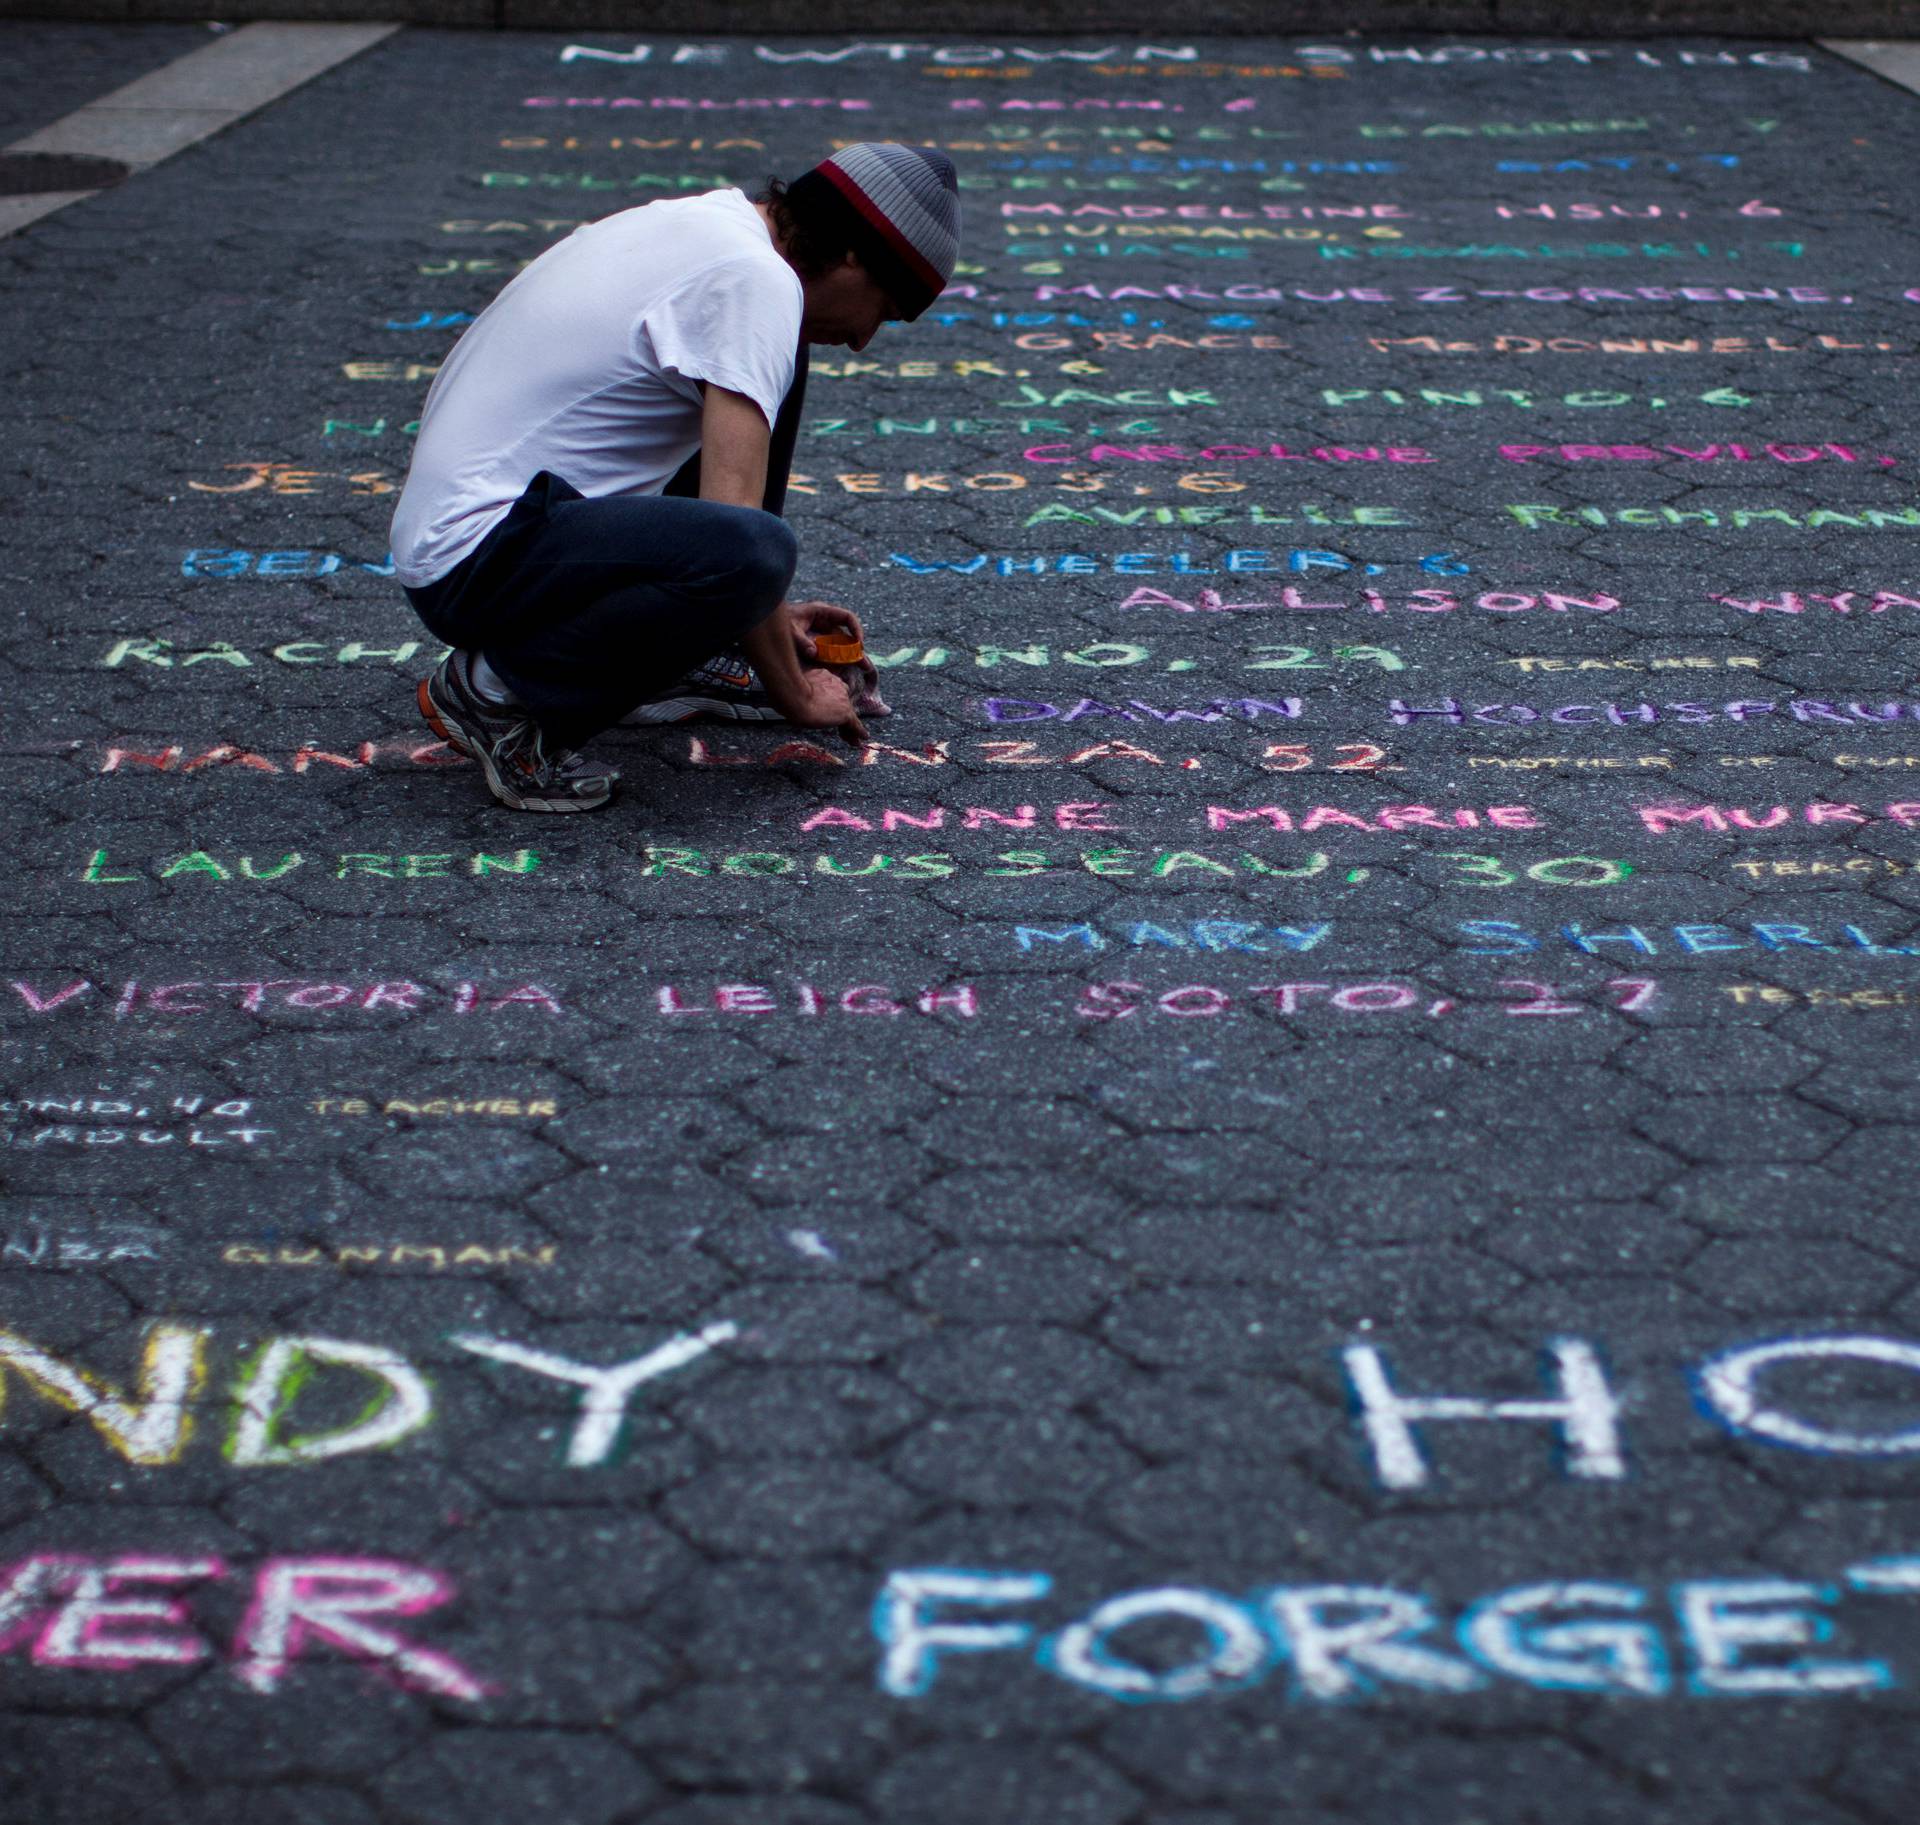 FILE PHOTO: Street artist Panzarino prepares a memorial as he writes the names of the Sandy Hook Elementary School victims during the six-month anniversary of the massacre, at Union Square in New York